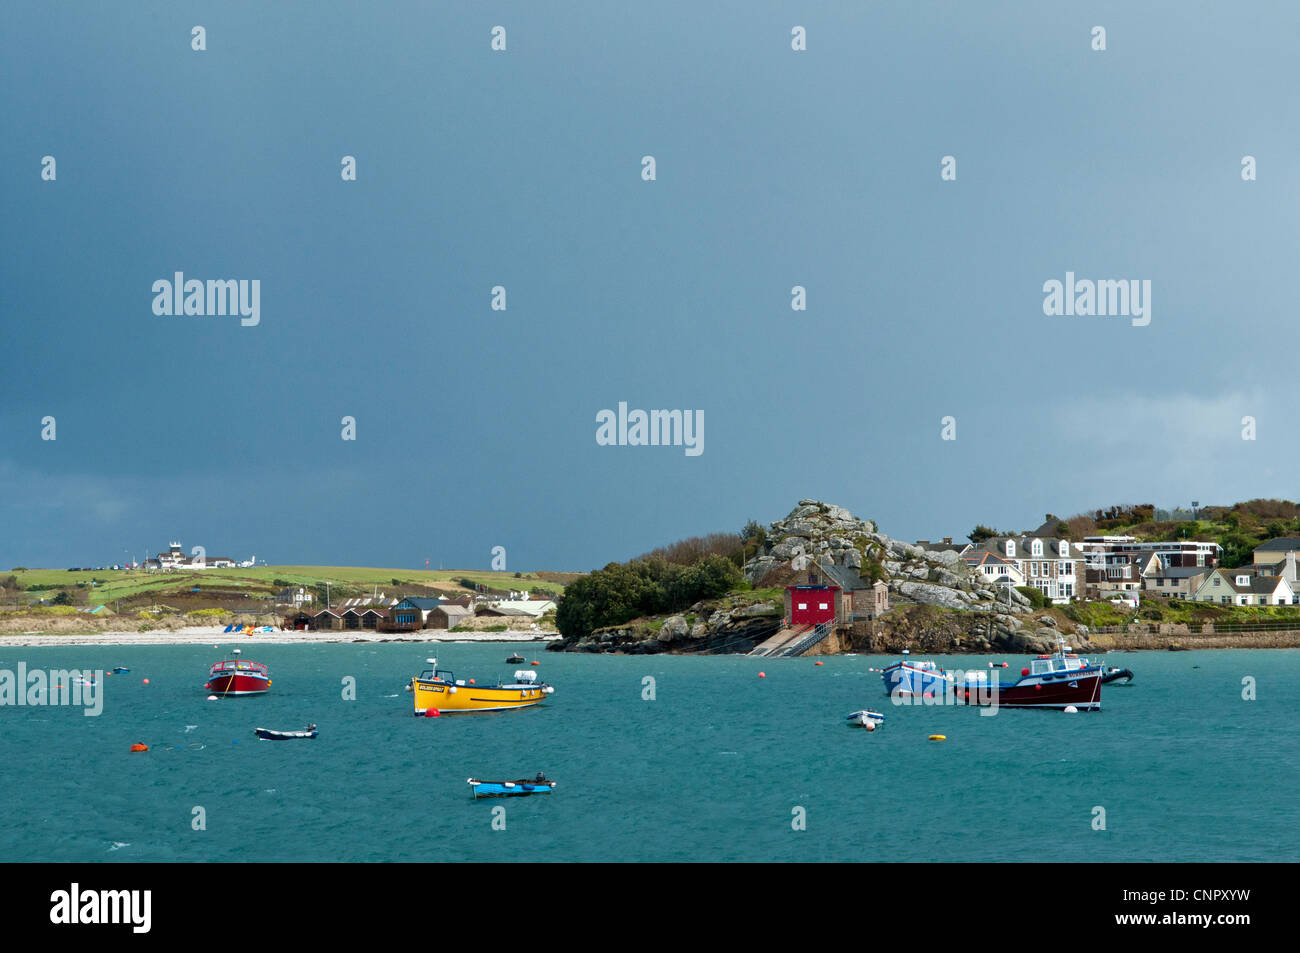 Barche ormeggiate a Hugh Town St Mary's sulle Isole Scilly Foto Stock